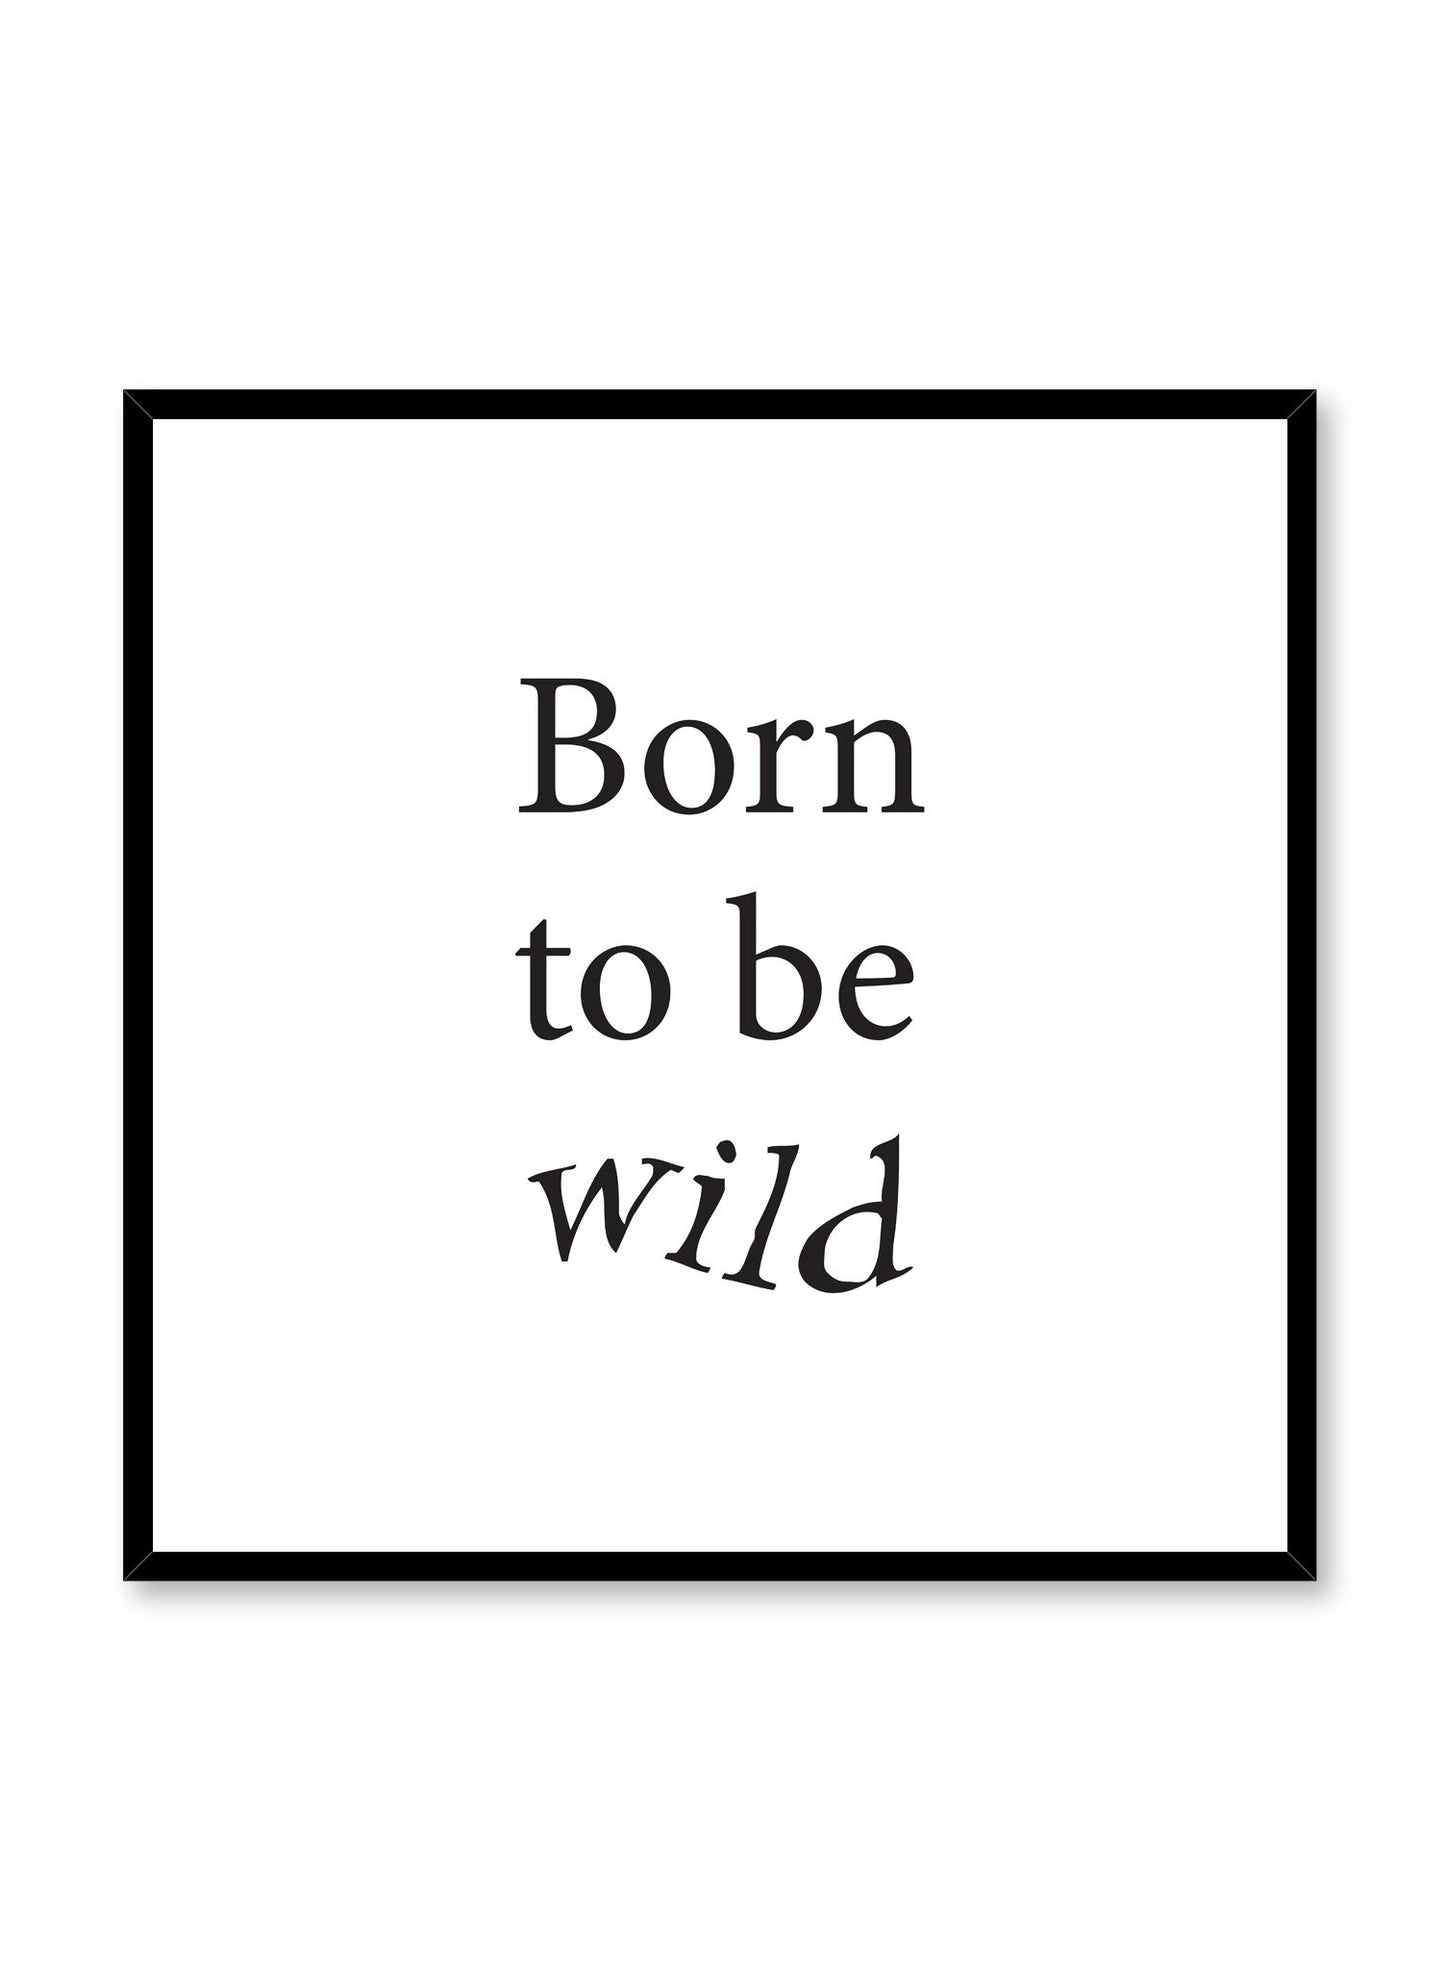 Scandinavian poster with black and white graphic typography design of Born to be wild by Opposite Wall in square format